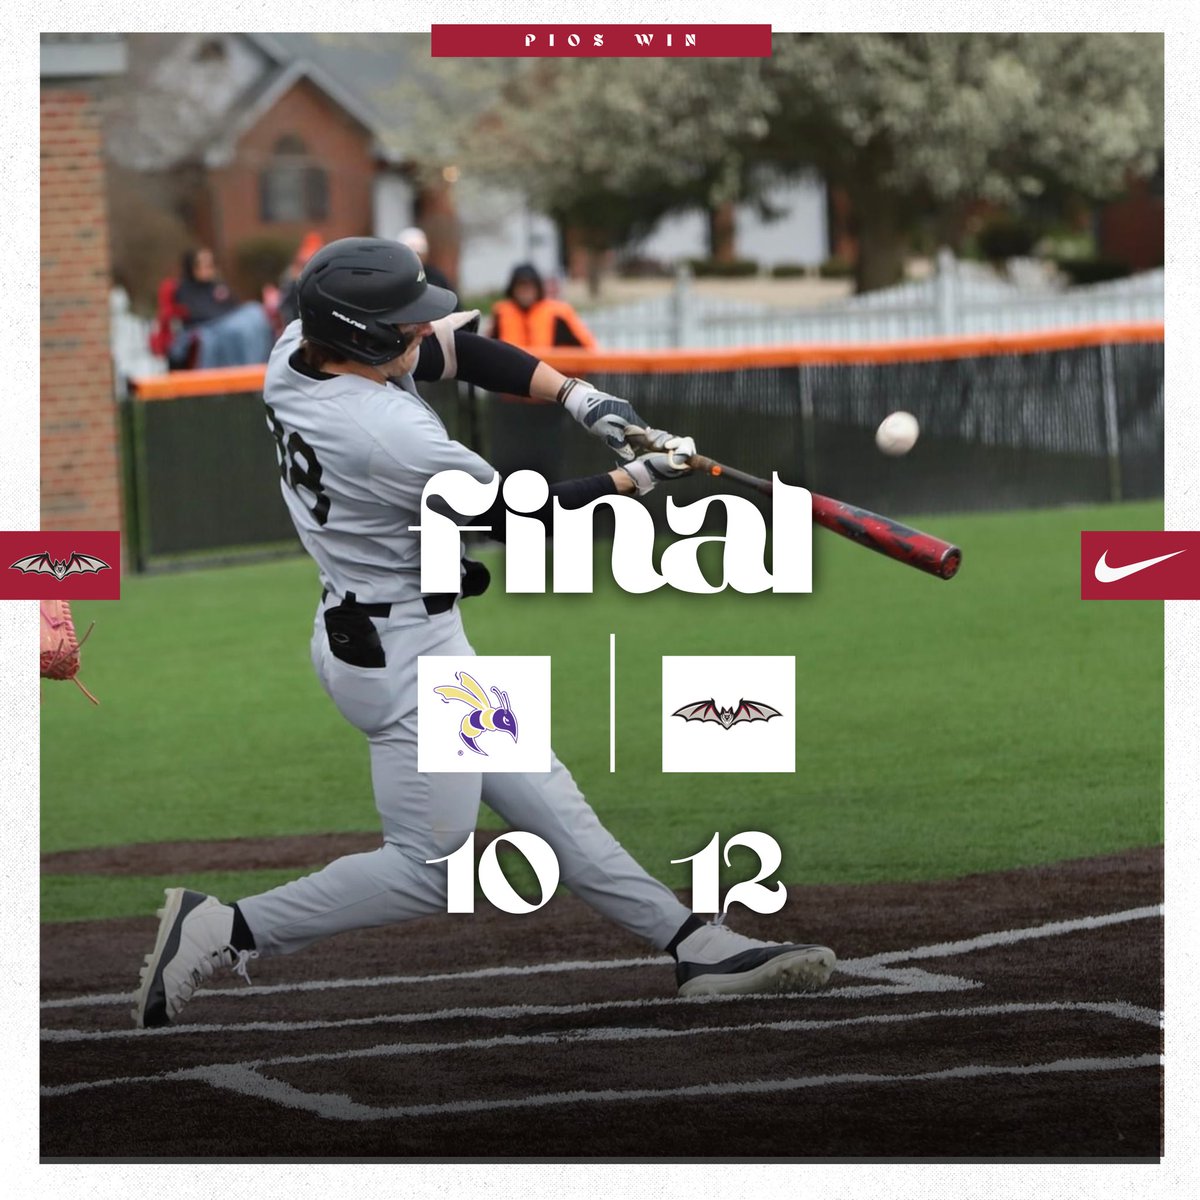 Get the brooms out 🧹 PIOS WIN❗️❗️